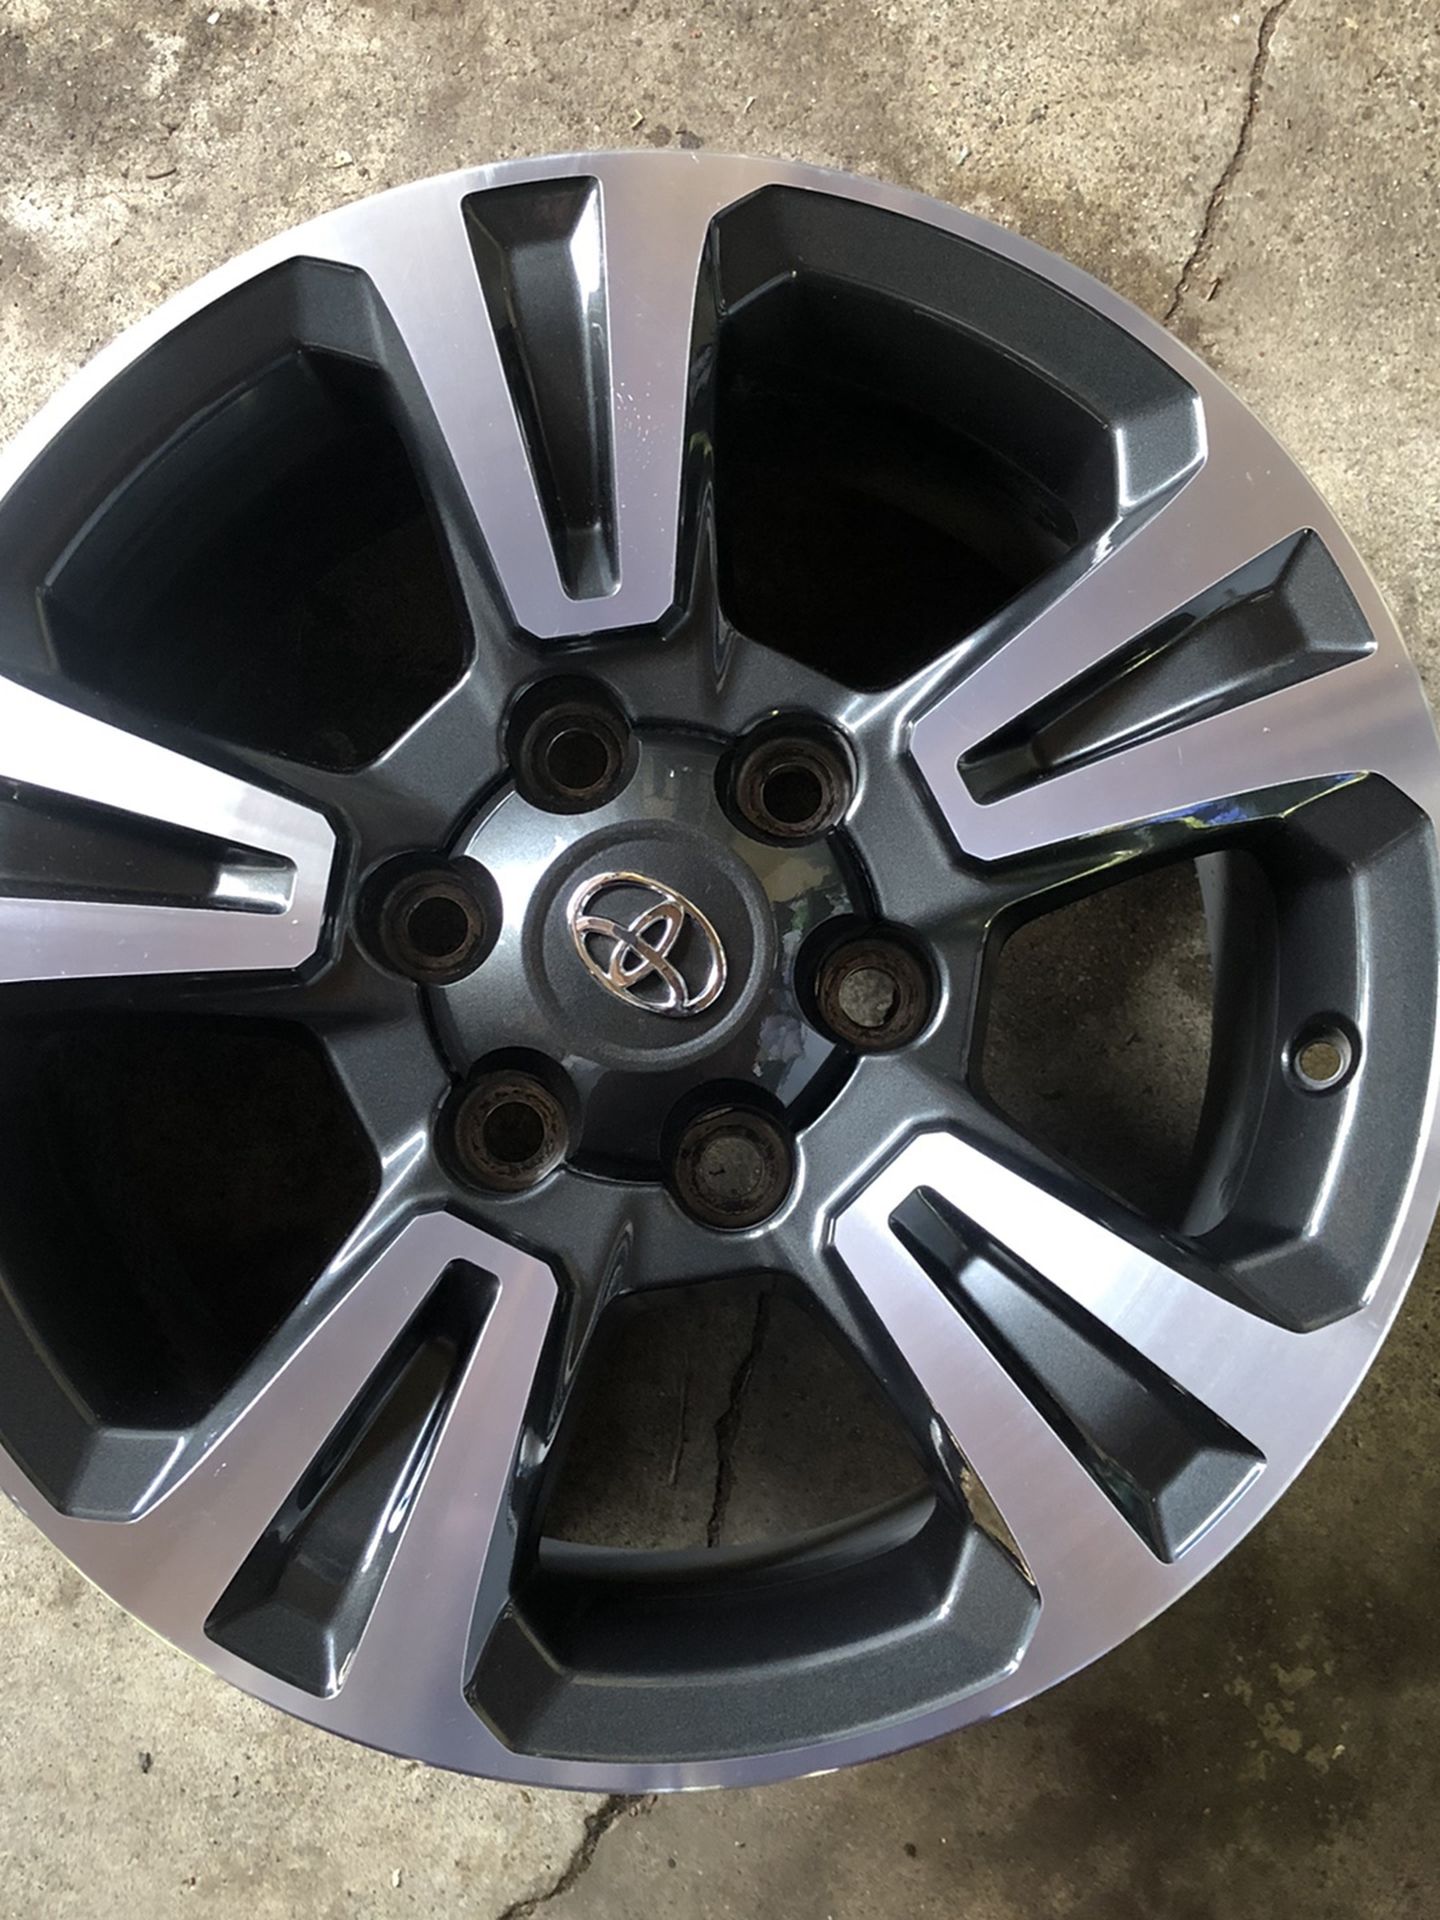 4 RIMS TOYOTA SIZE 17 TRD STOCK THEY FIT TACOMA SEQUOIA 4RUNNER  6 LUGS GREAT CONDITION AND GREAT SHAPE 9/10 